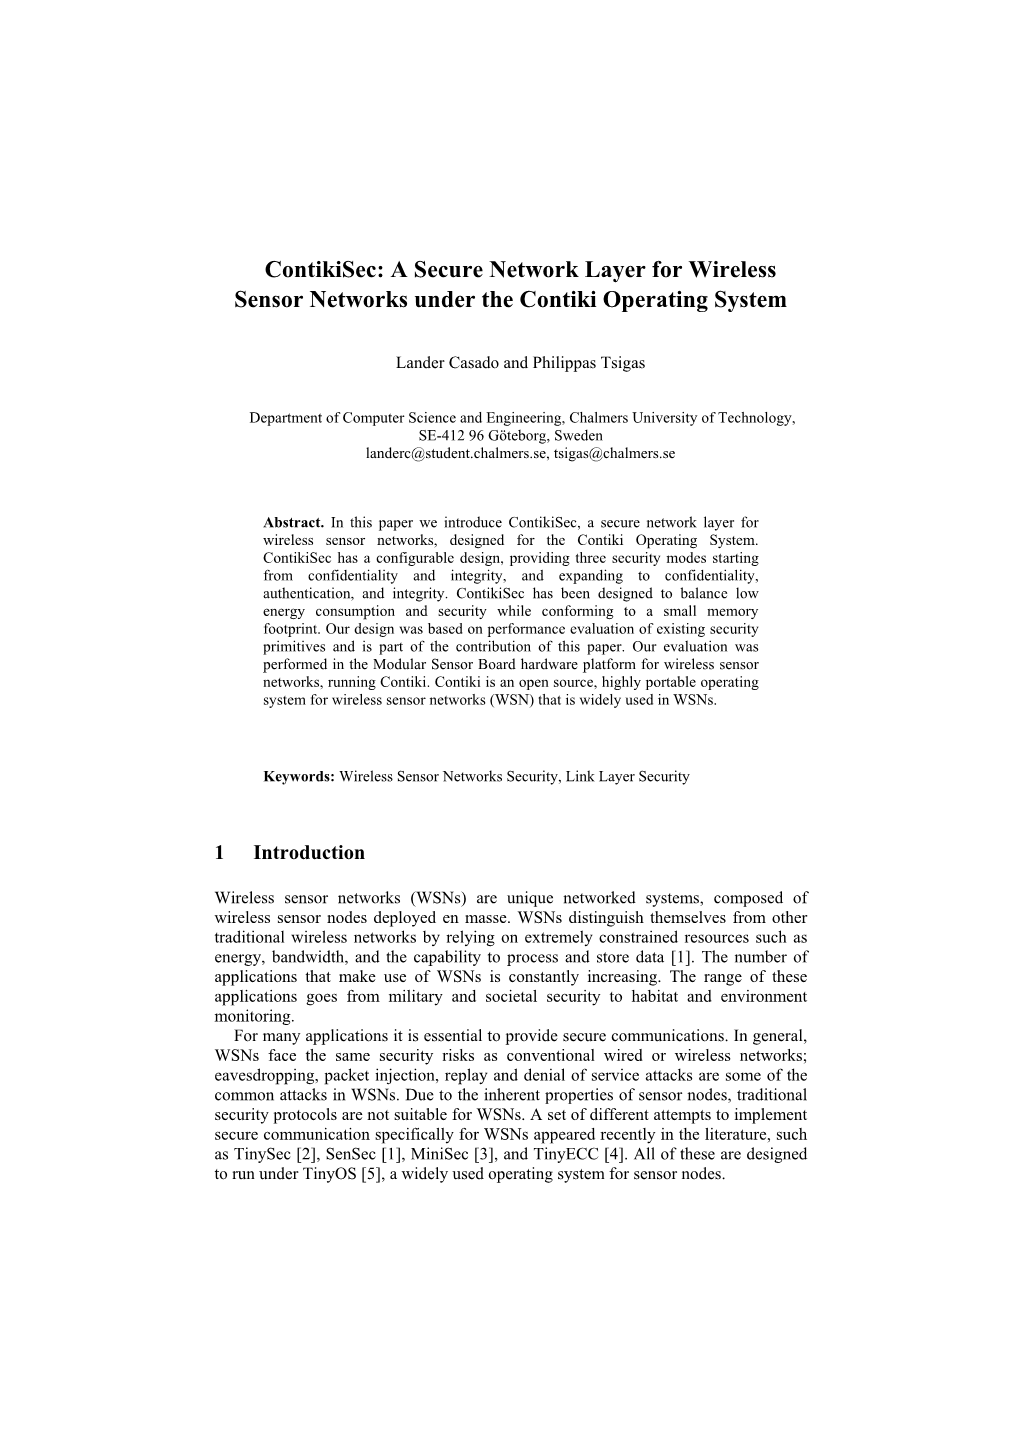 Contikisec: a Secure Network Layer for Wireless Sensor Networks Under the Contiki Operating System